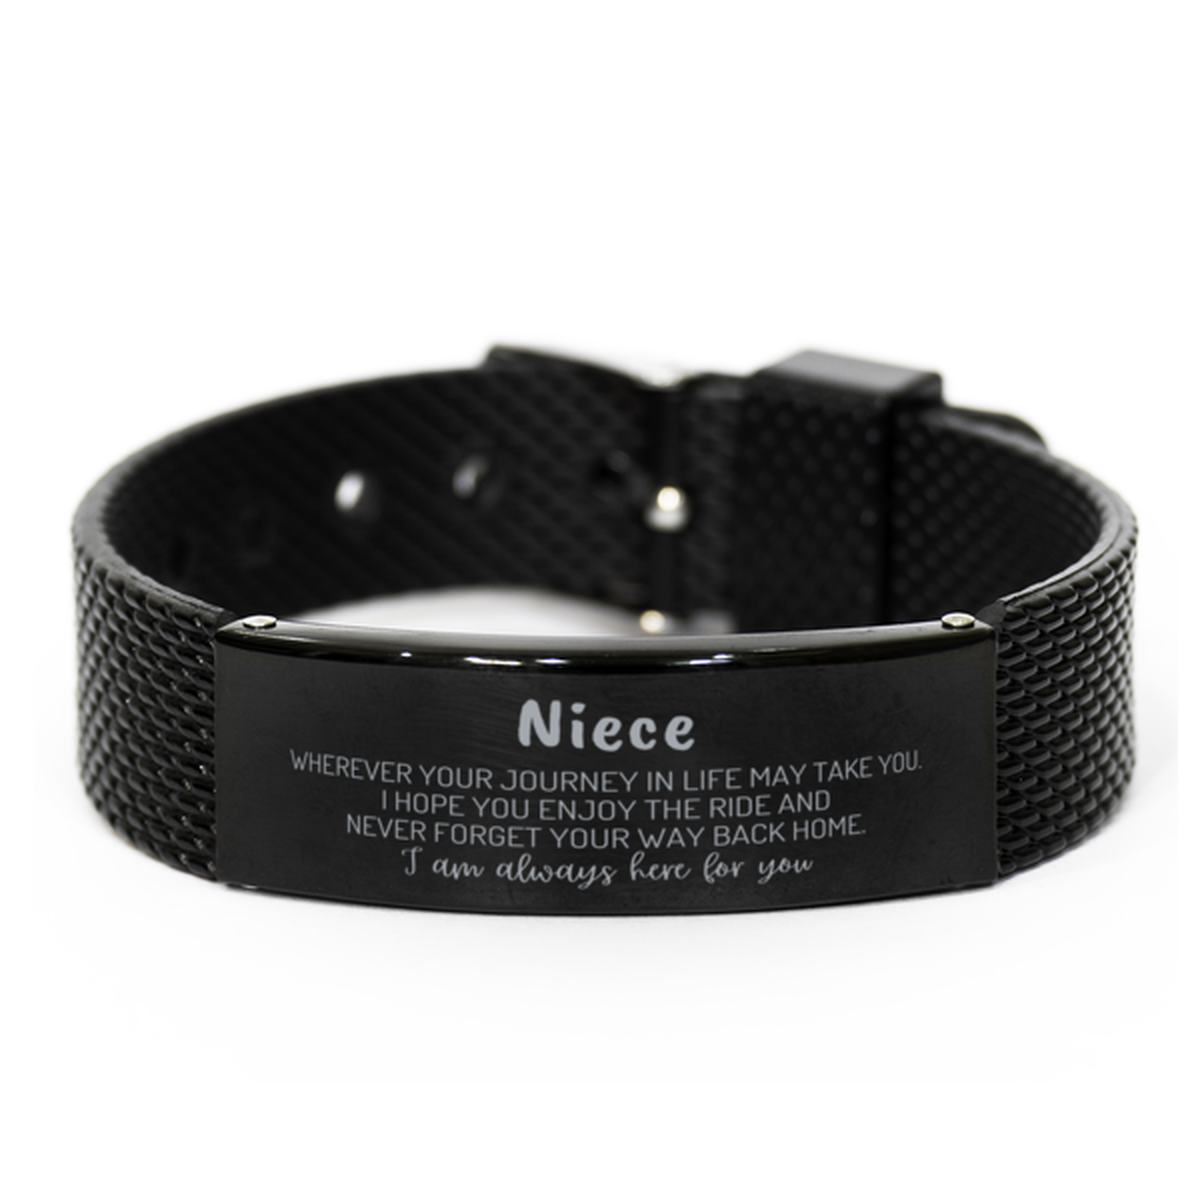 Niece wherever your journey in life may take you, I am always here for you Niece Black Shark Mesh Bracelet, Awesome Christmas Gifts For Niece, Niece Birthday Gifts for Men Women Family Loved One